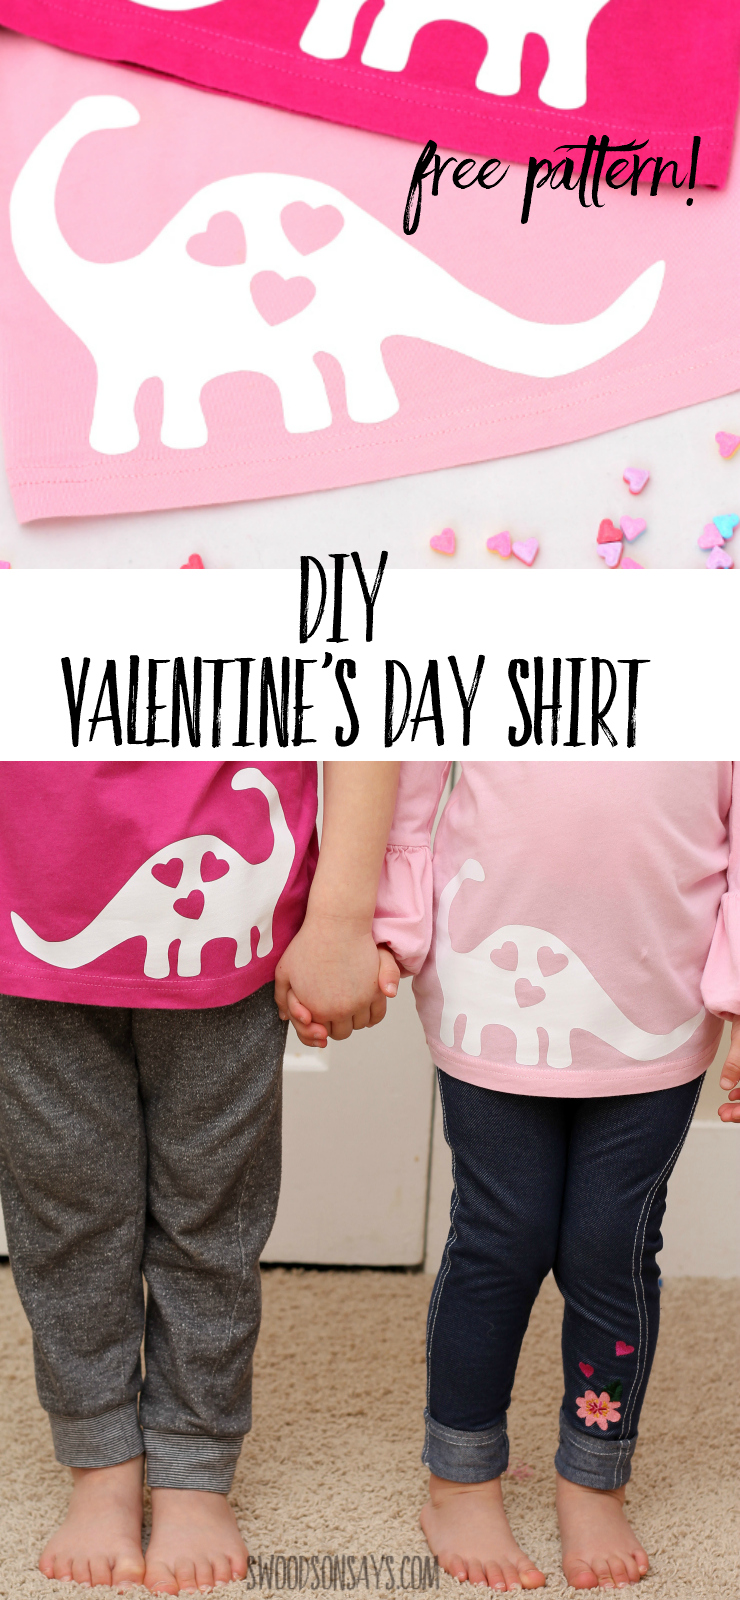 Need a fast Valentine's Day DIY shirt idea? Use this free dinosaur applique pattern and you'll be set! Use iron-on and a cutting machine or freezer paper & paint, either way you'll be done in 15 minutes. Perfect DIY tshirt for dinosaur lovers! #valentinesday #diyvalentine #diyvalentinesdayshirt